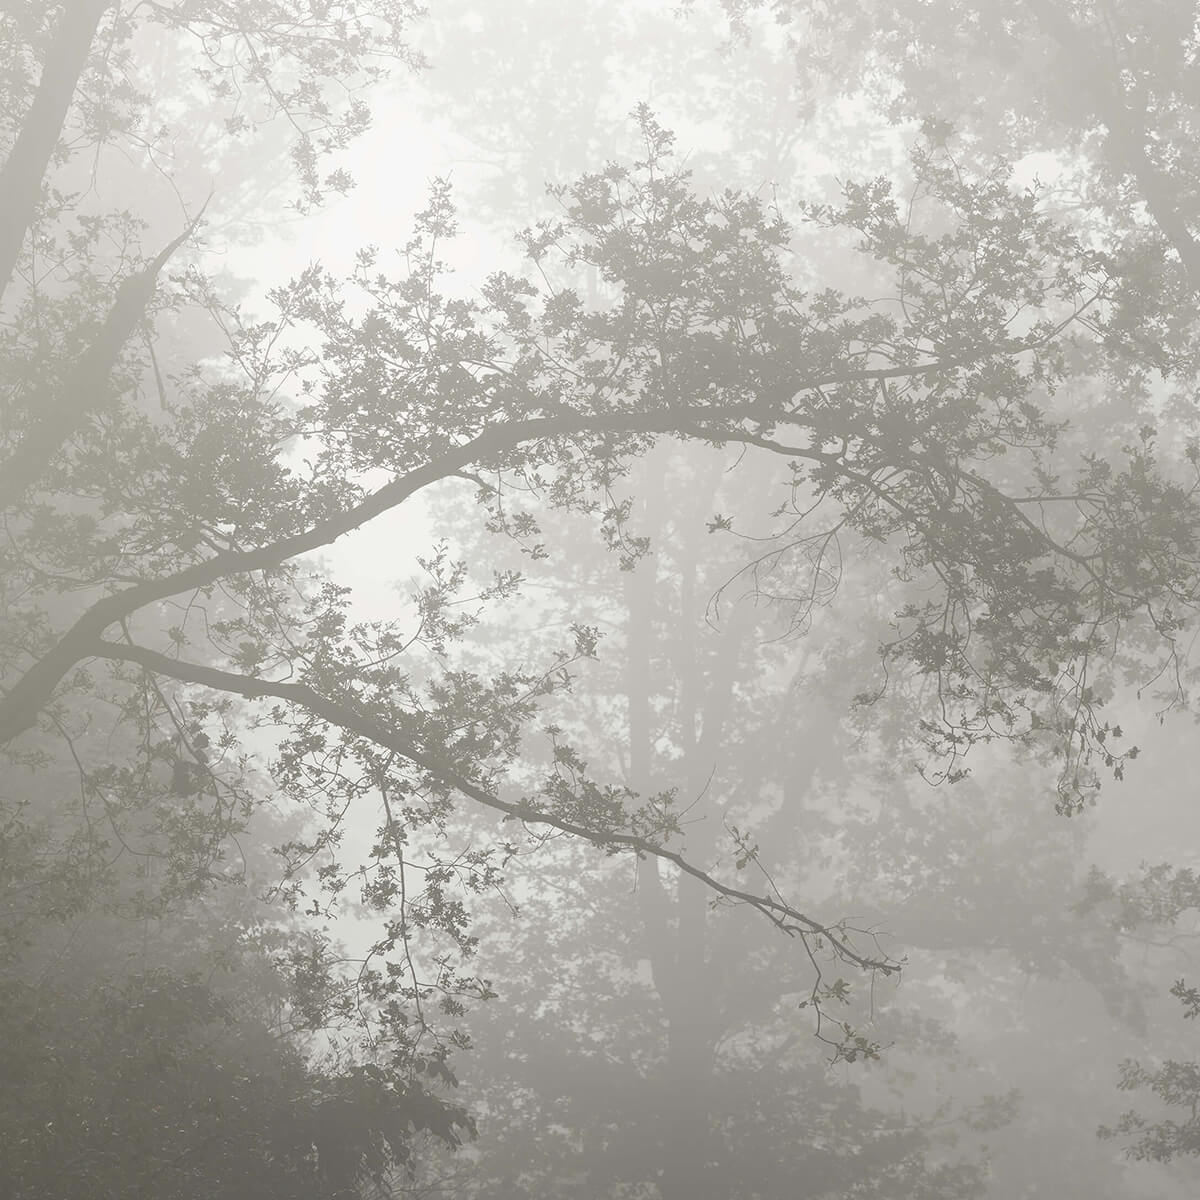 Beautiful forest in the fog